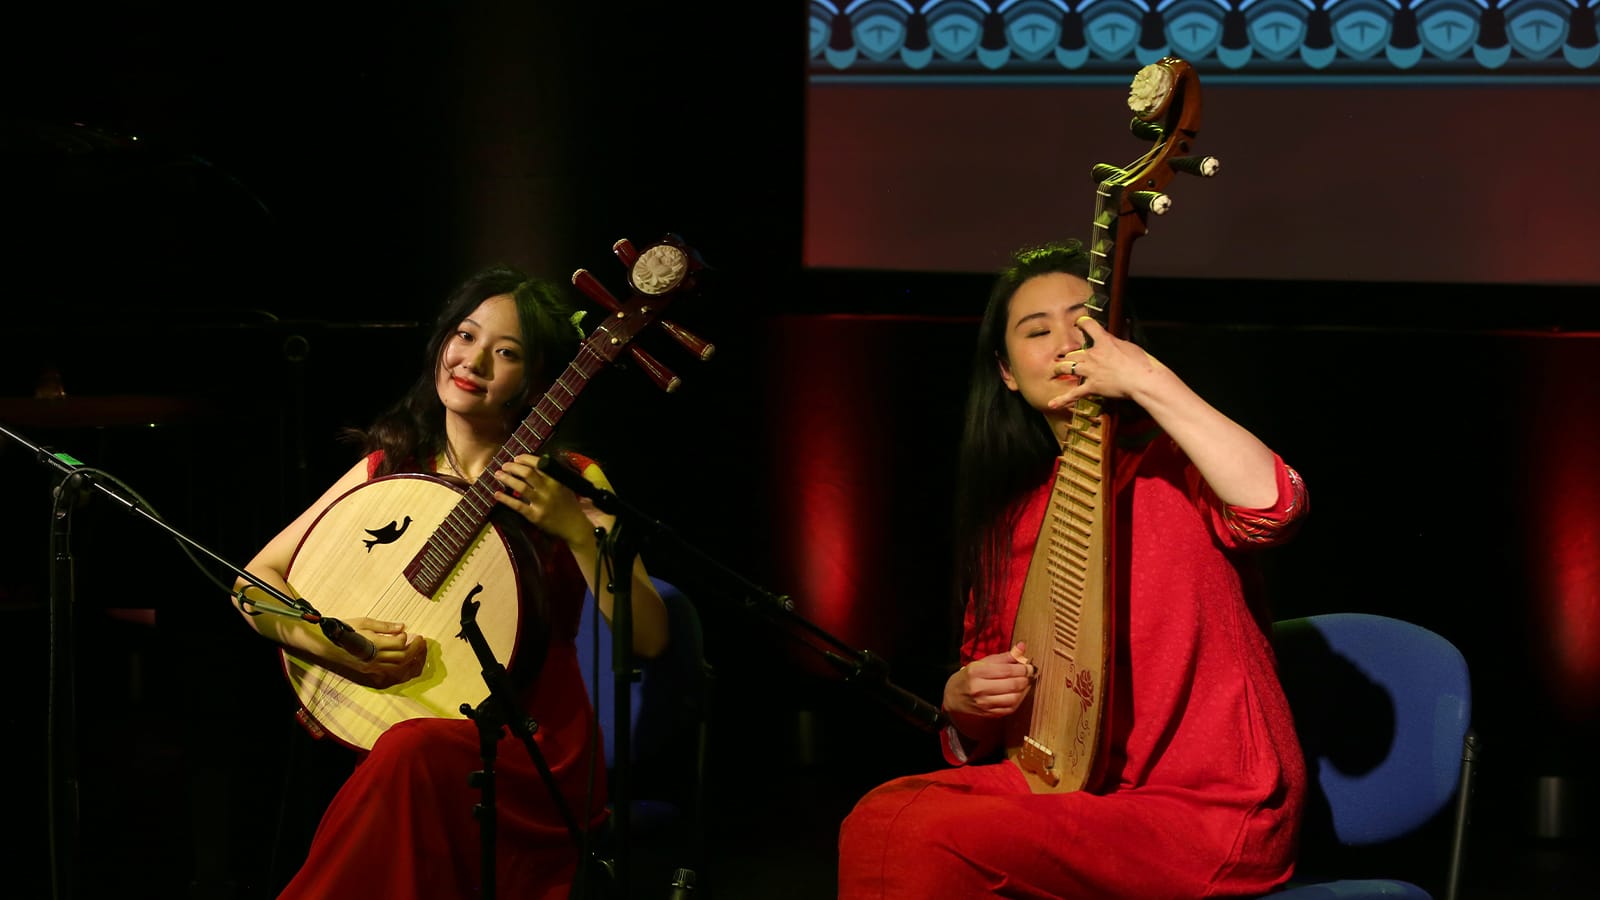 Two women in red dresses play traditional string instruments